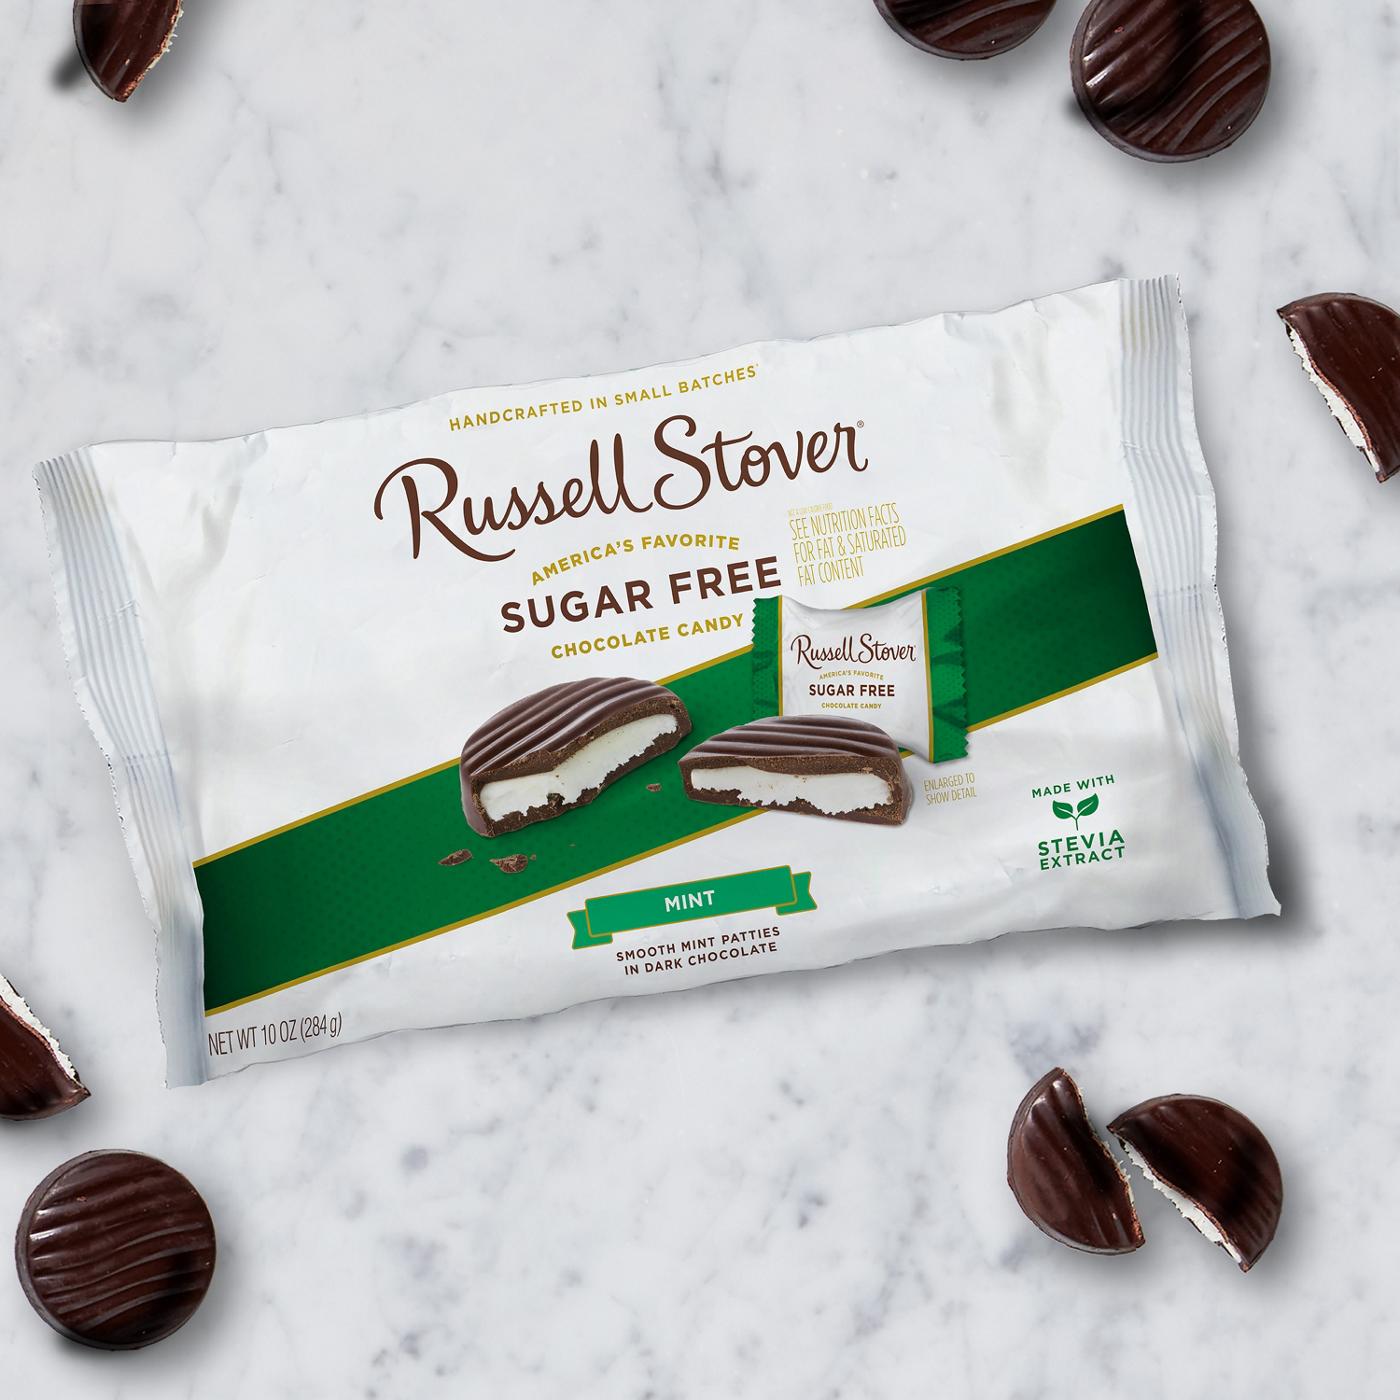 Russell Stover Sugar Free Mint Patties; image 5 of 5